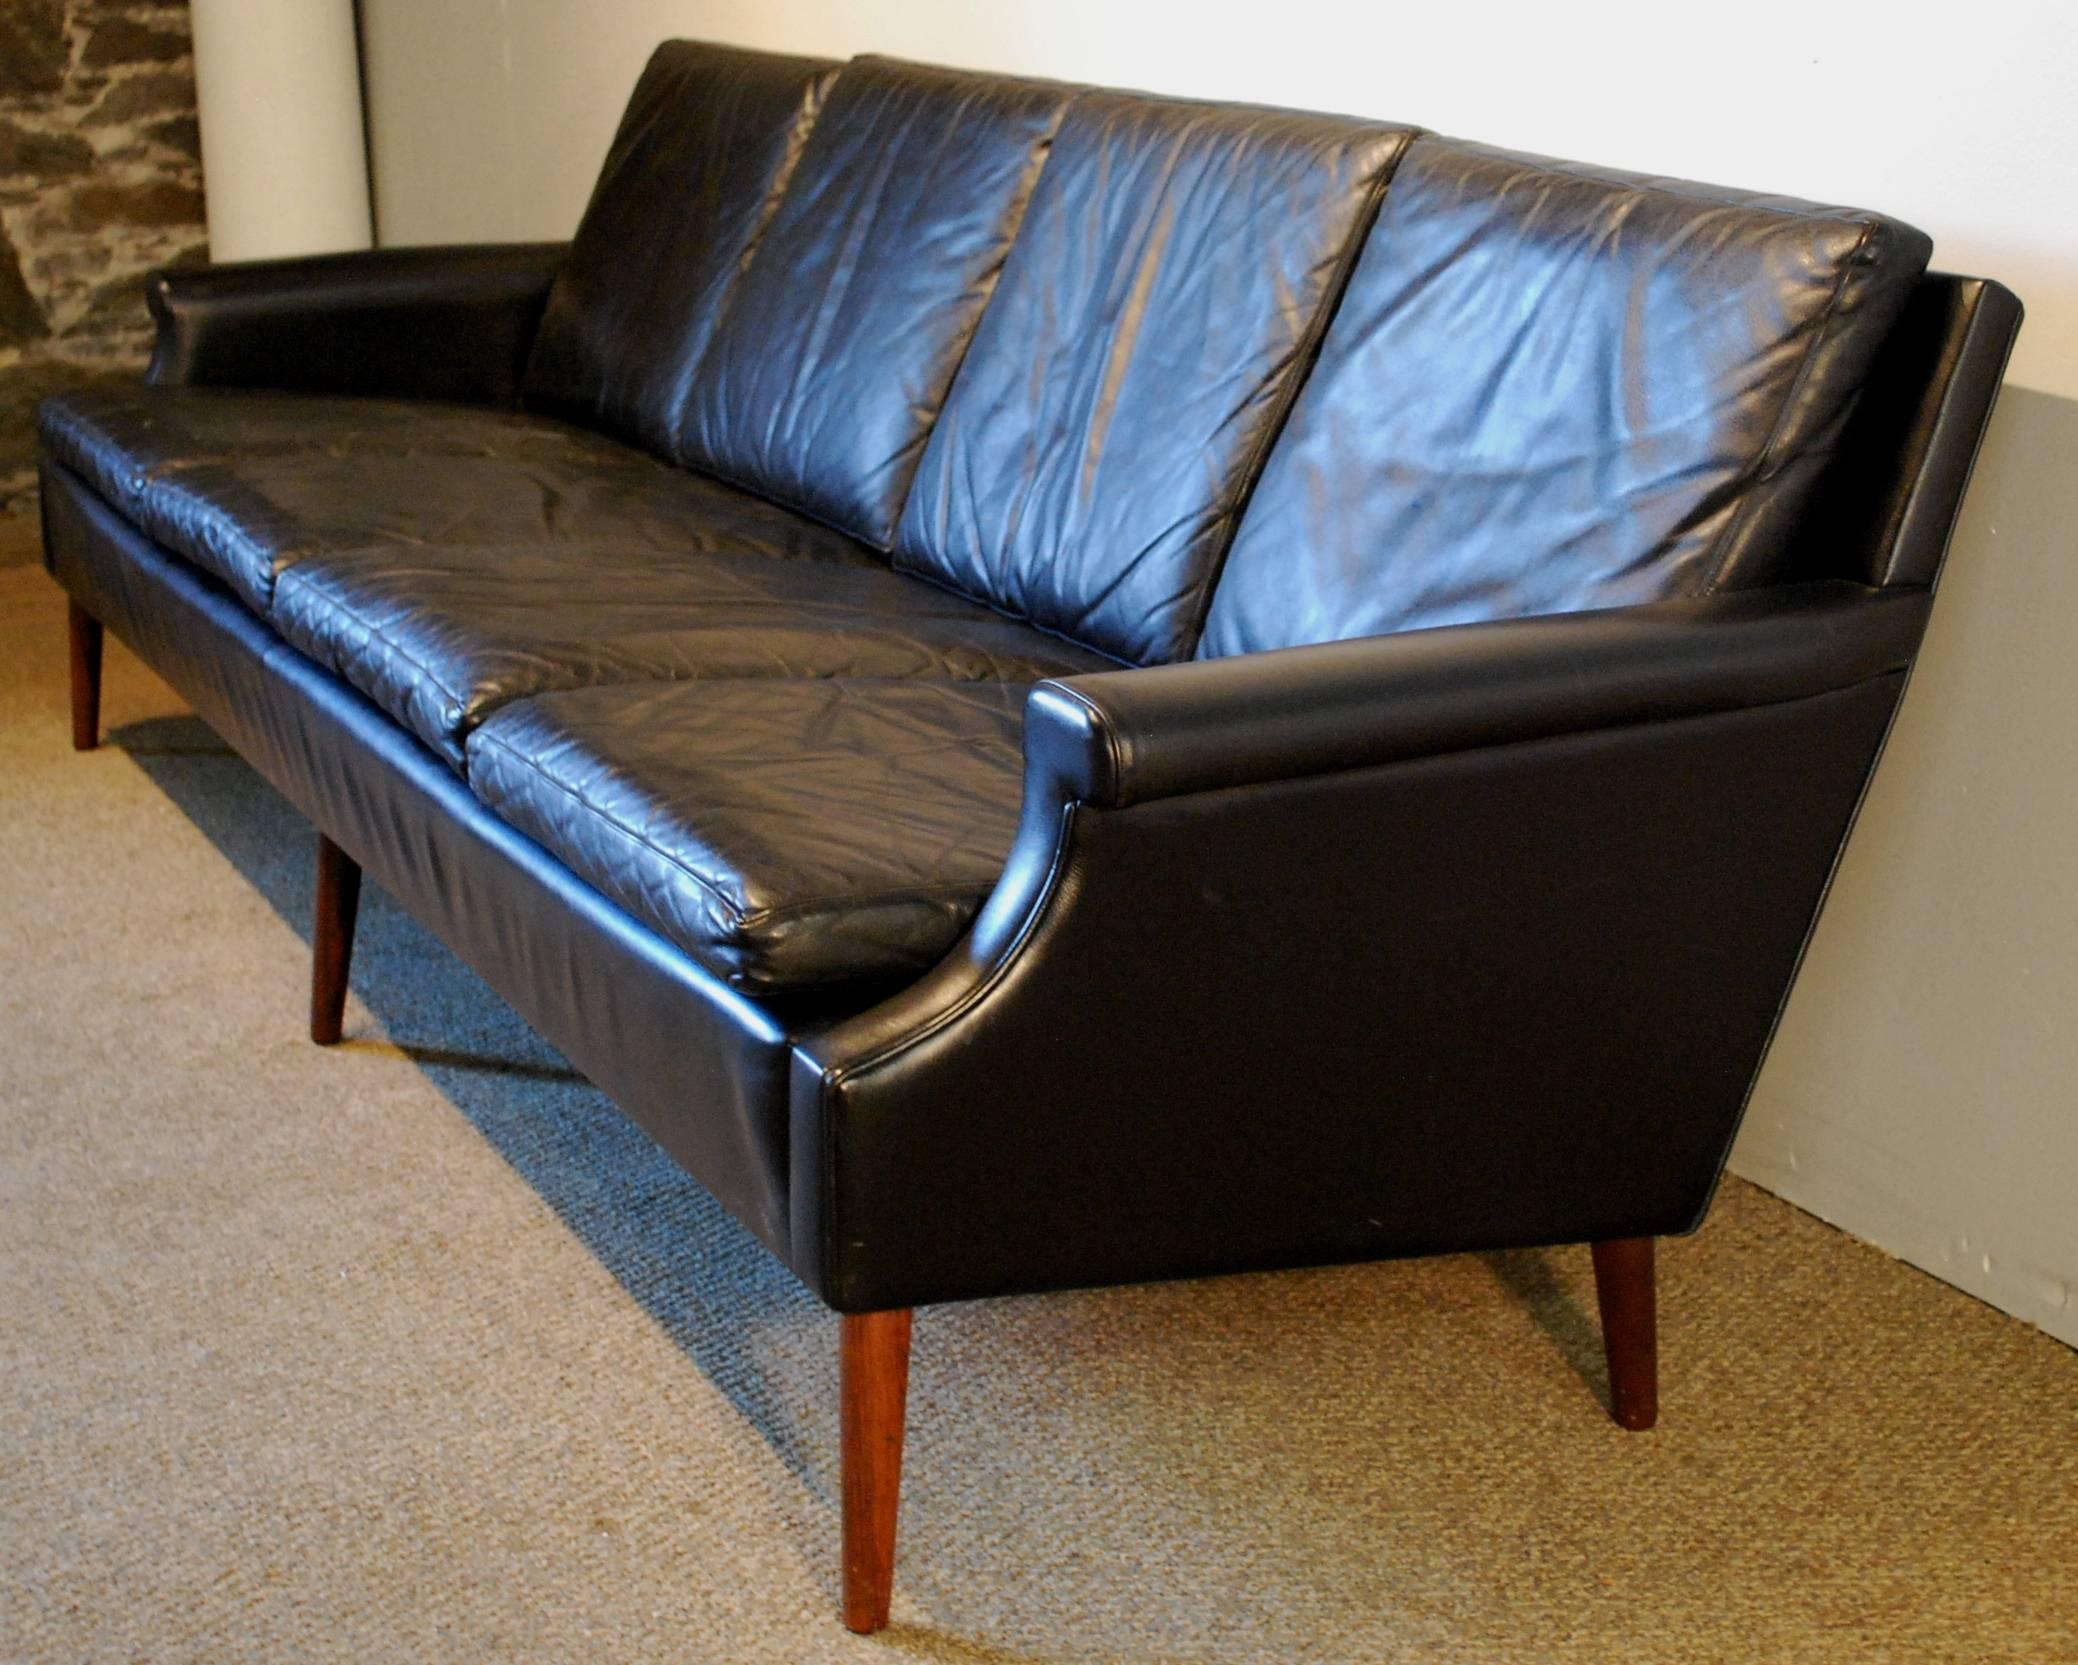 A Georg Thams designed Danish modern full grain black leather sofa featuring a Classic clean lined four cushion design. Elegant freestanding piece with no seams in the leather on the back which is quite unusual on a large sofa.